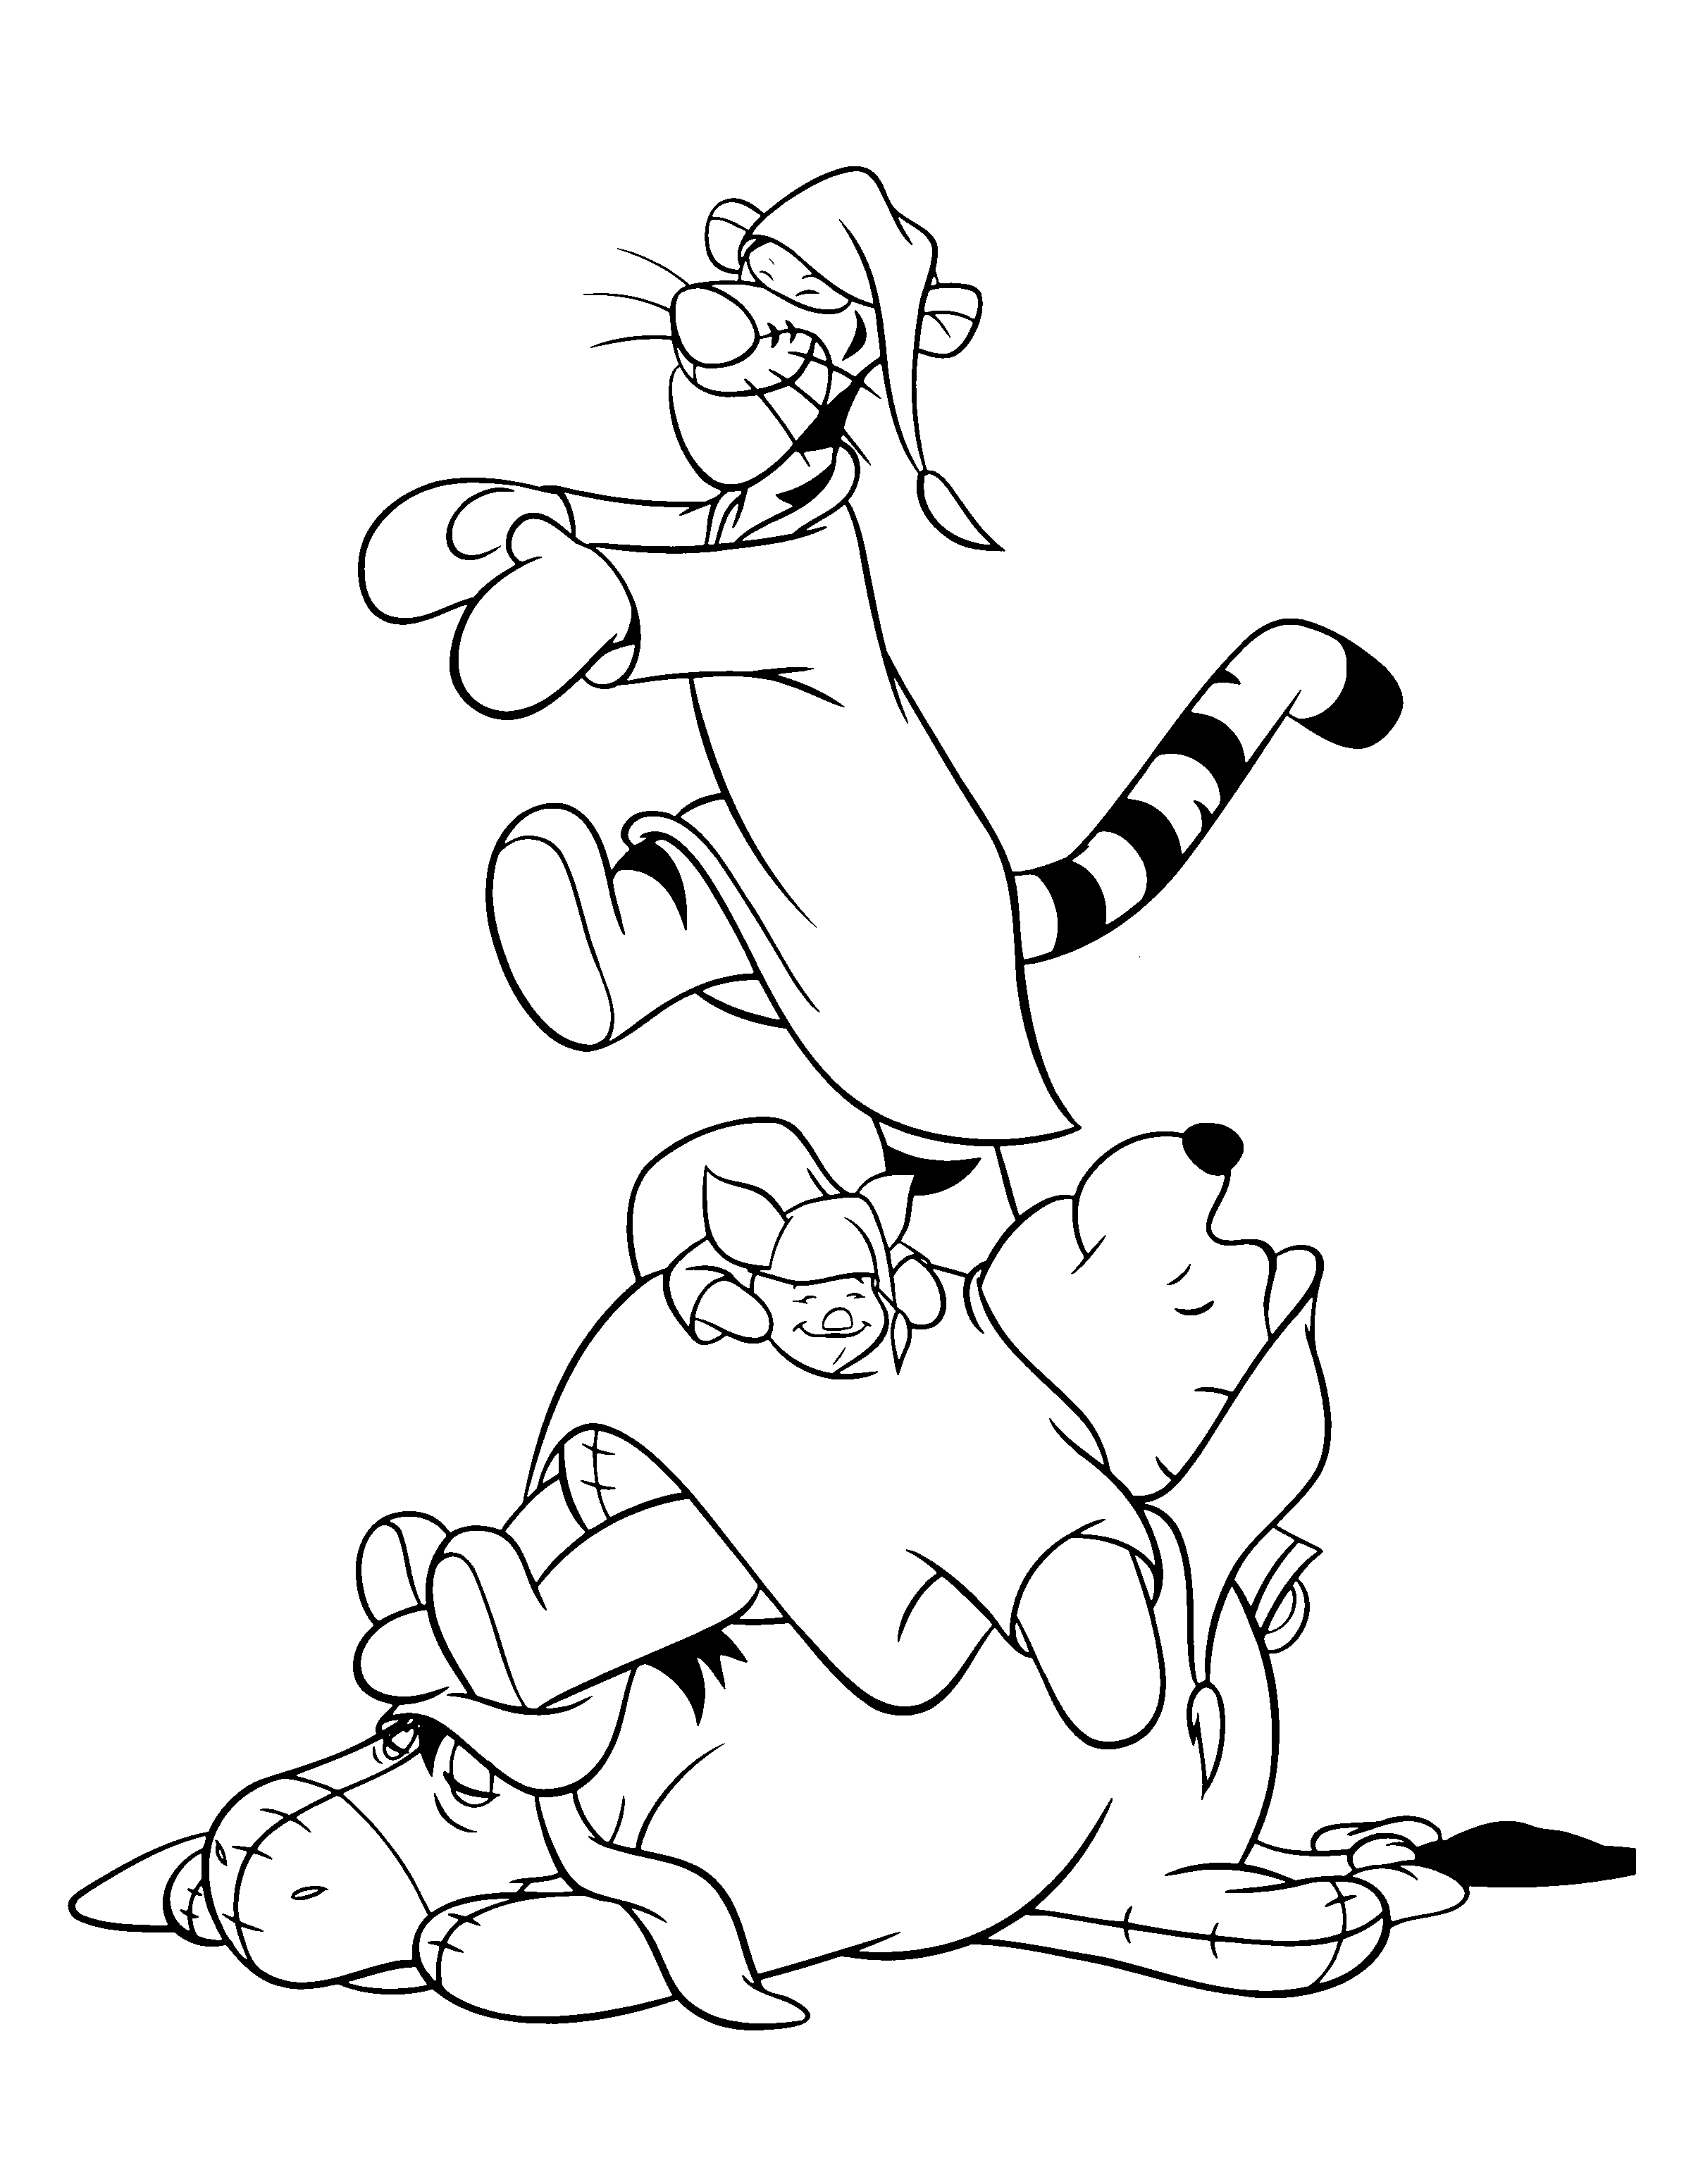 animated-coloring-pages-winnie-the-pooh-image-0013